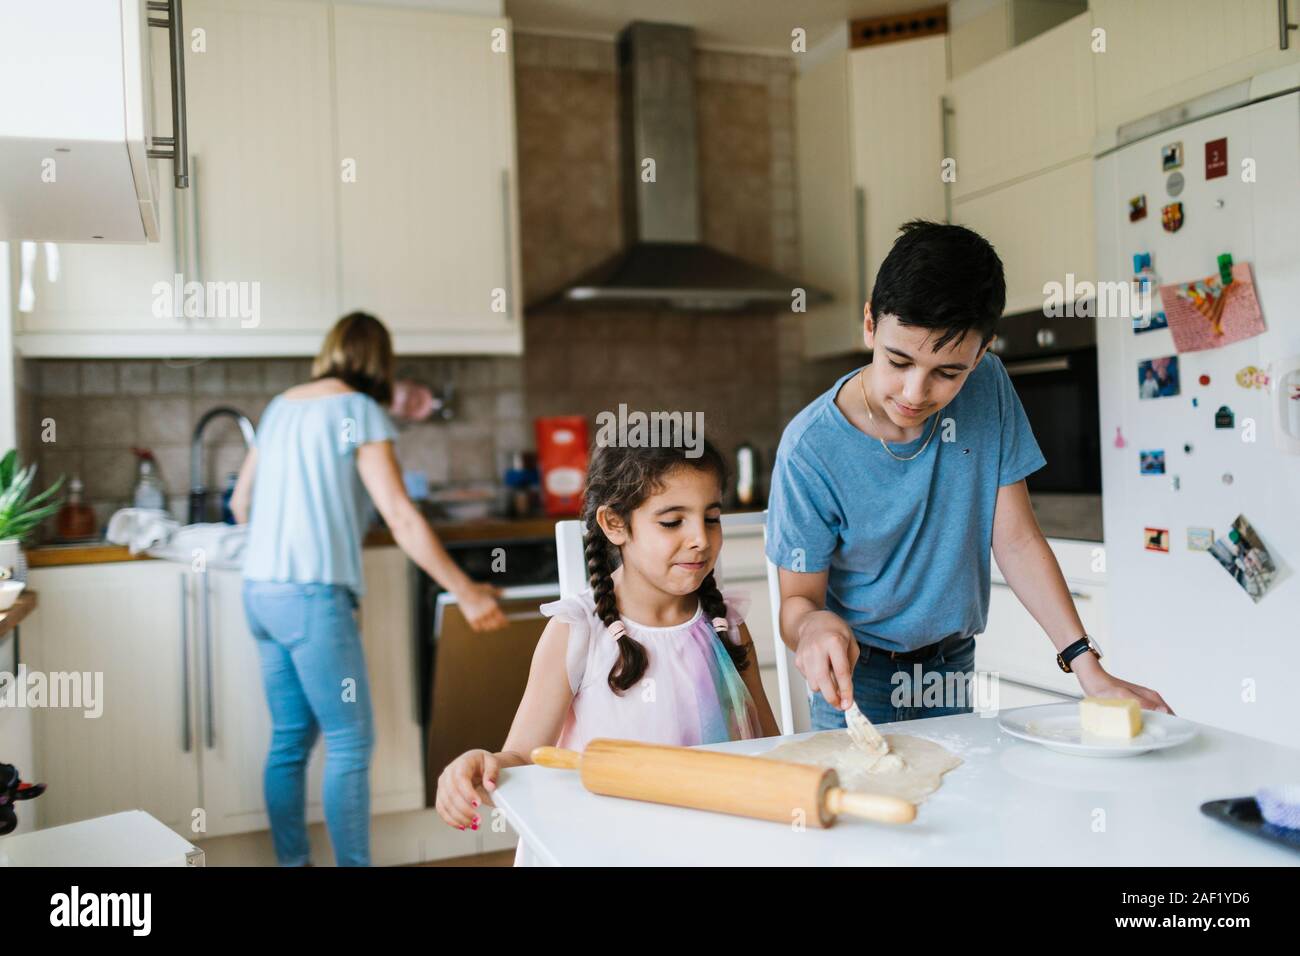 Brother and sister baking in kitchen Stock Photo